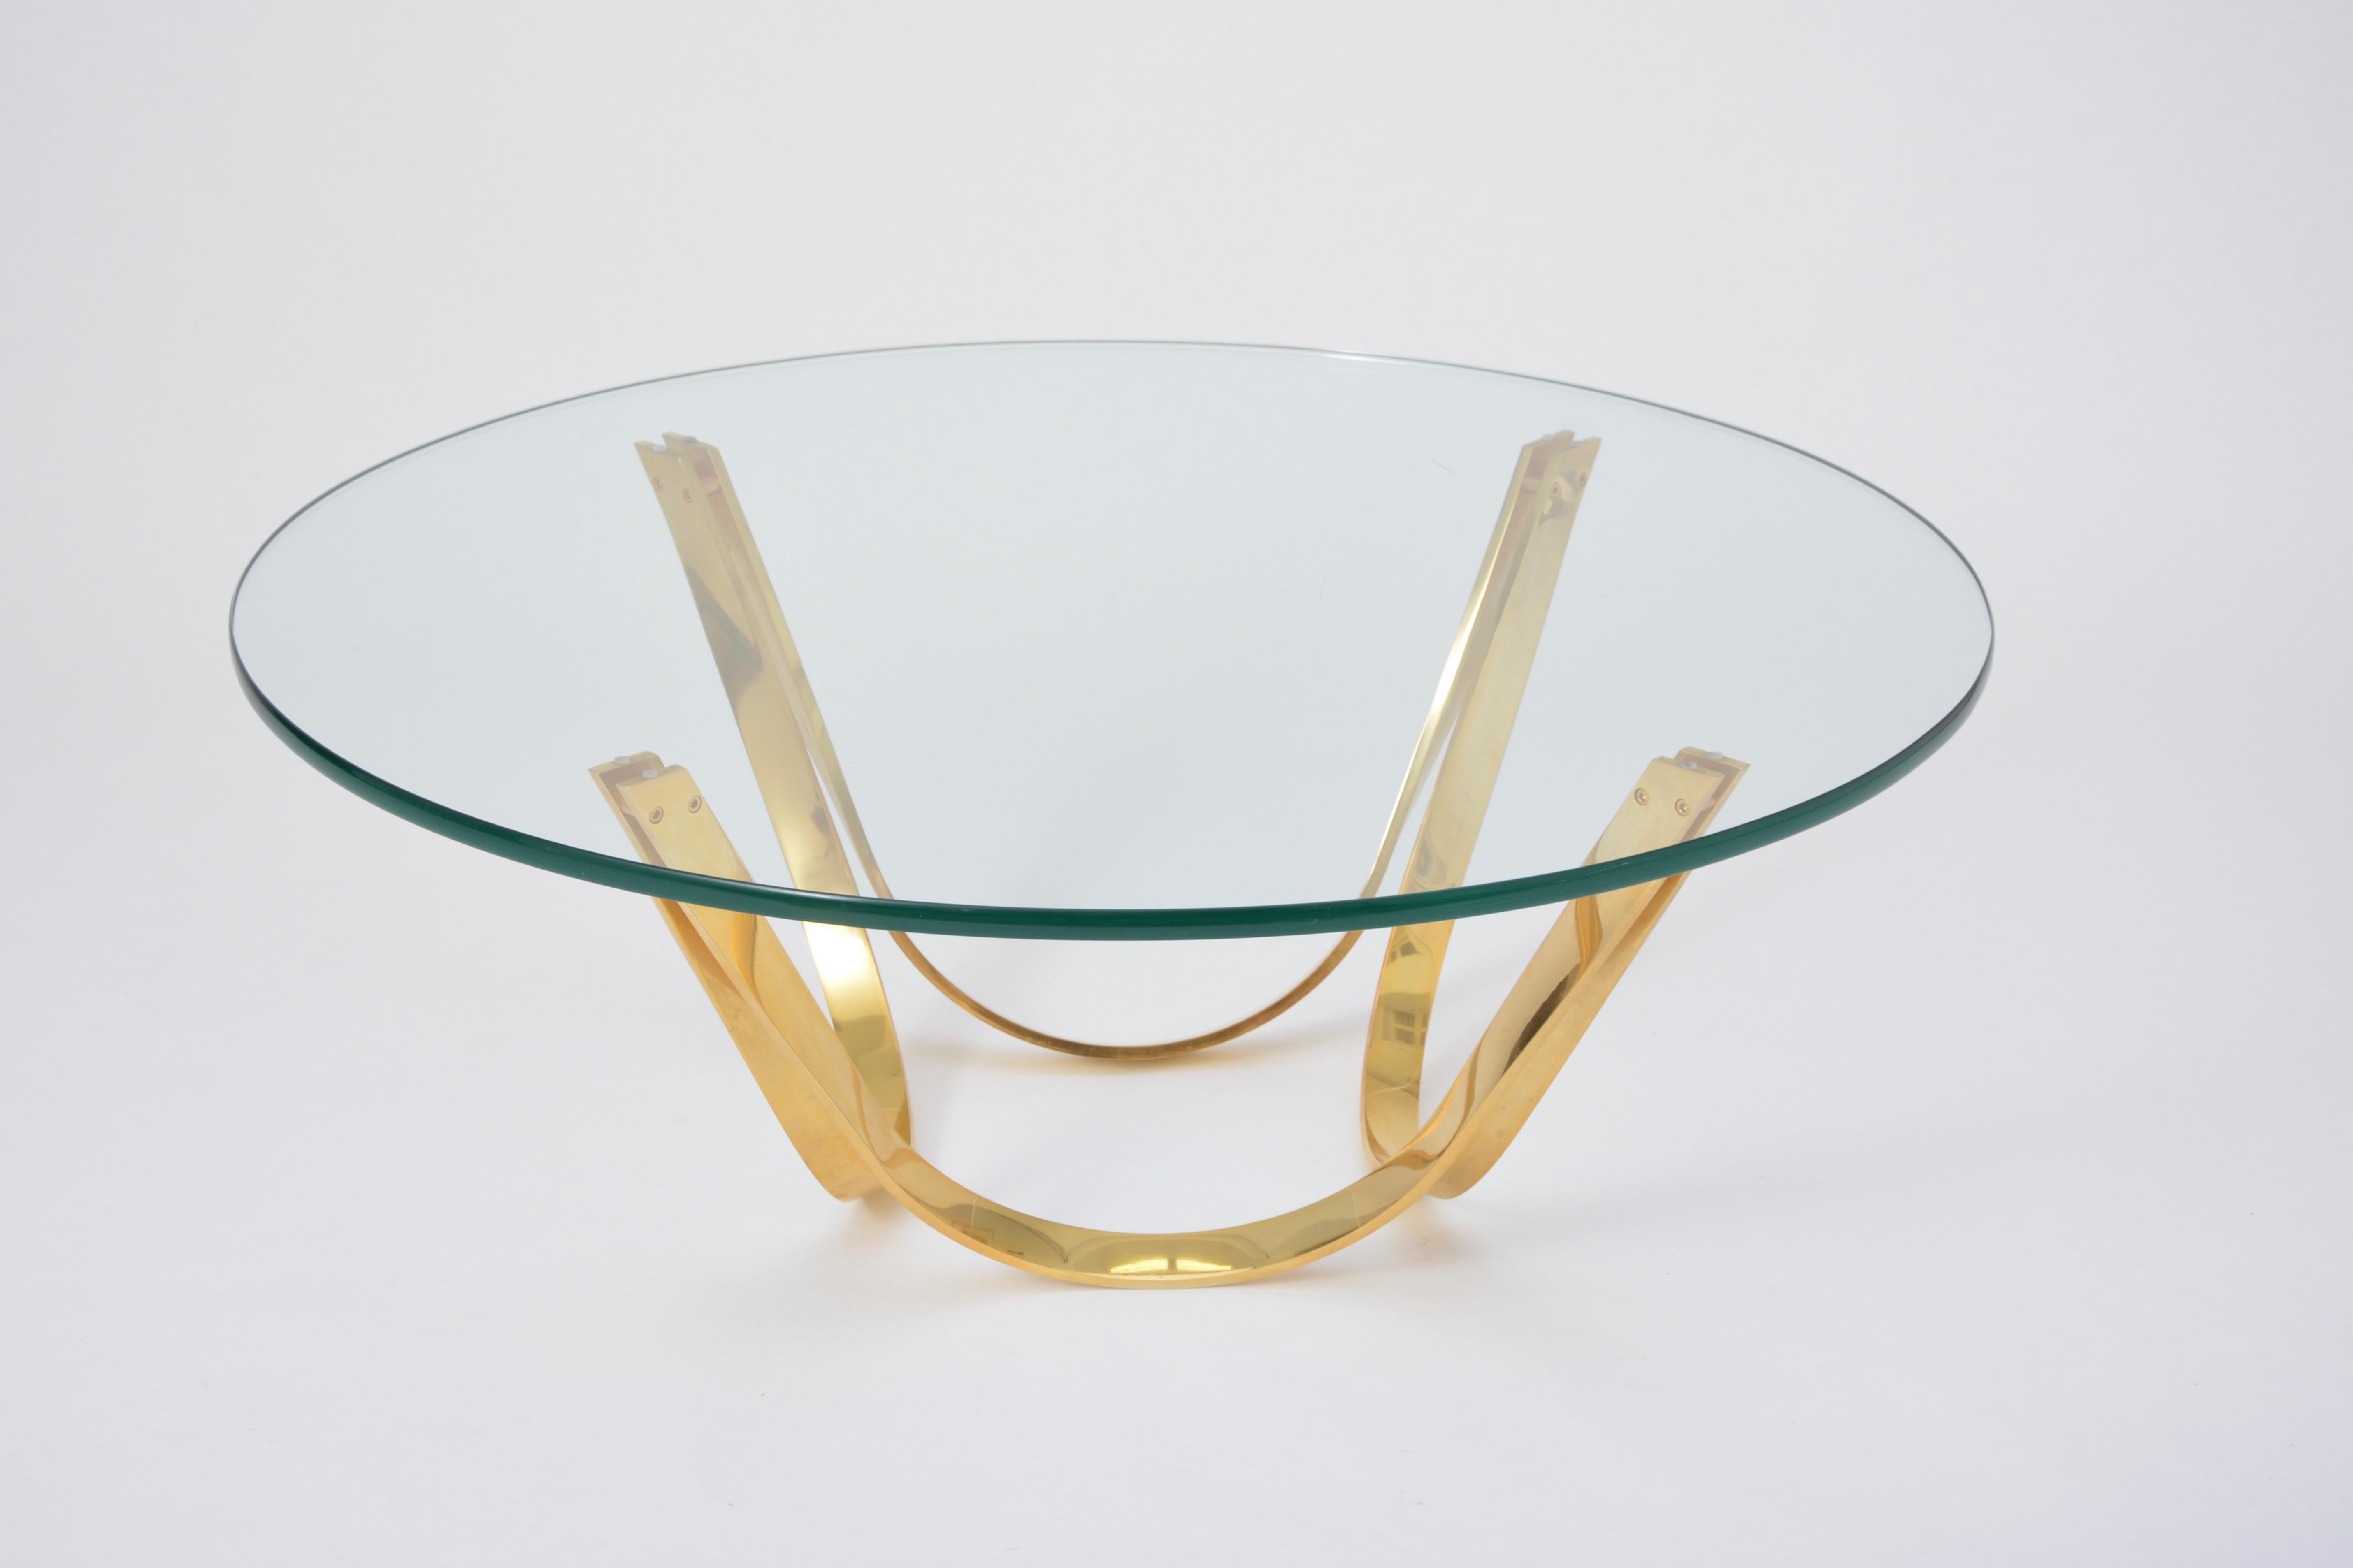 Golden Round Midcentury Coffee Table by Roger Sprunger for Dunbar 1